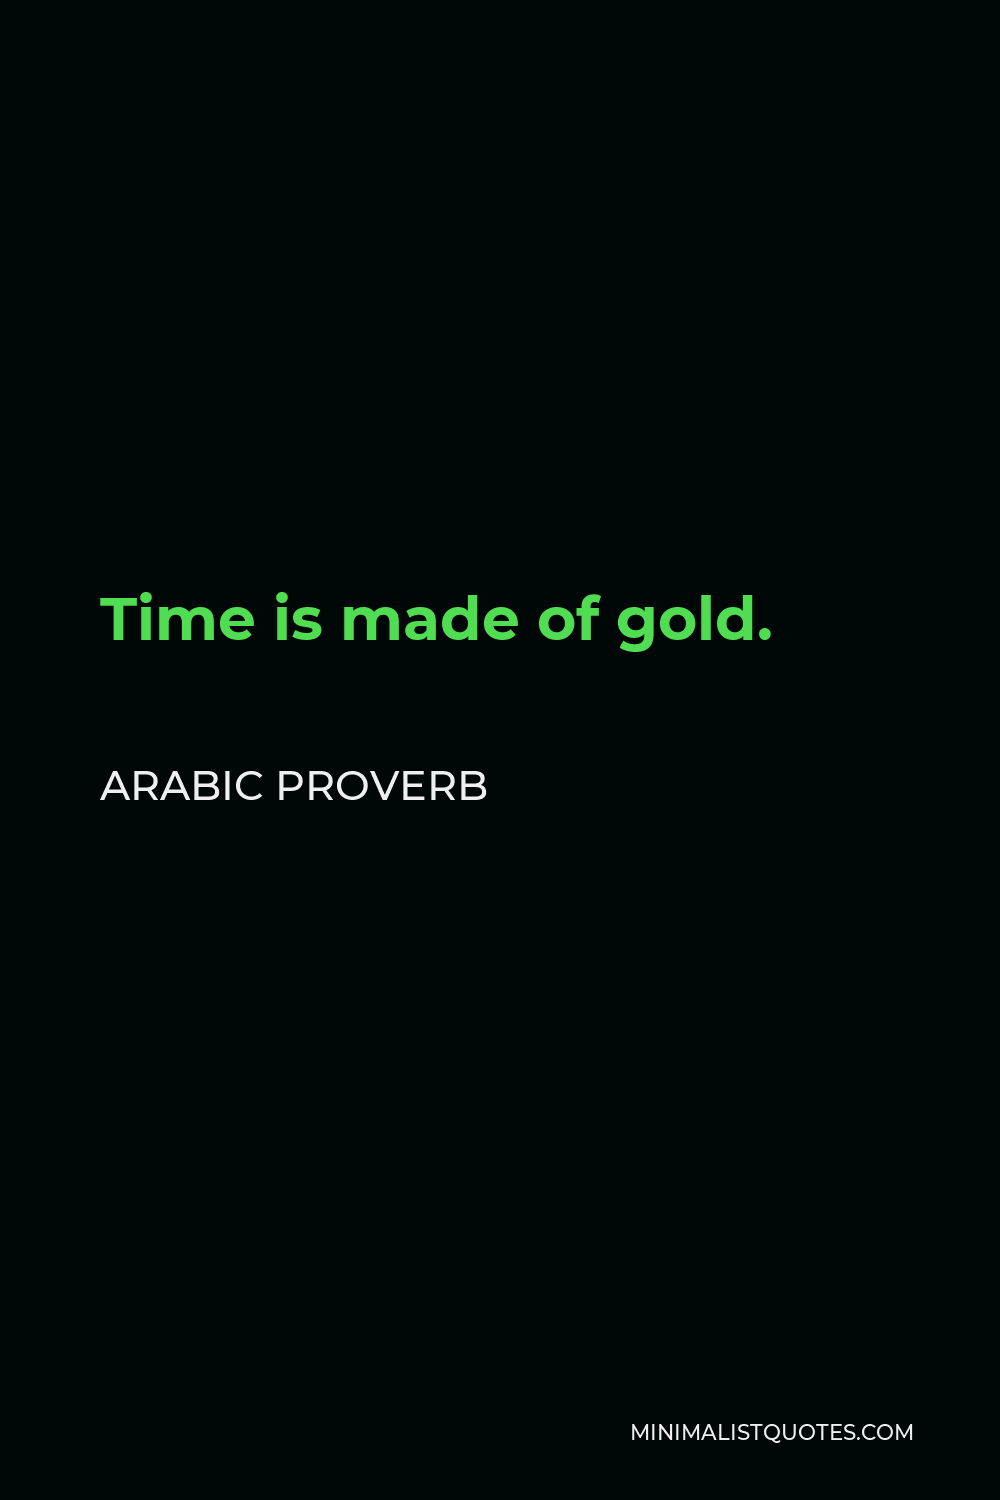 Arabic Proverb Quote - Time is made of gold.